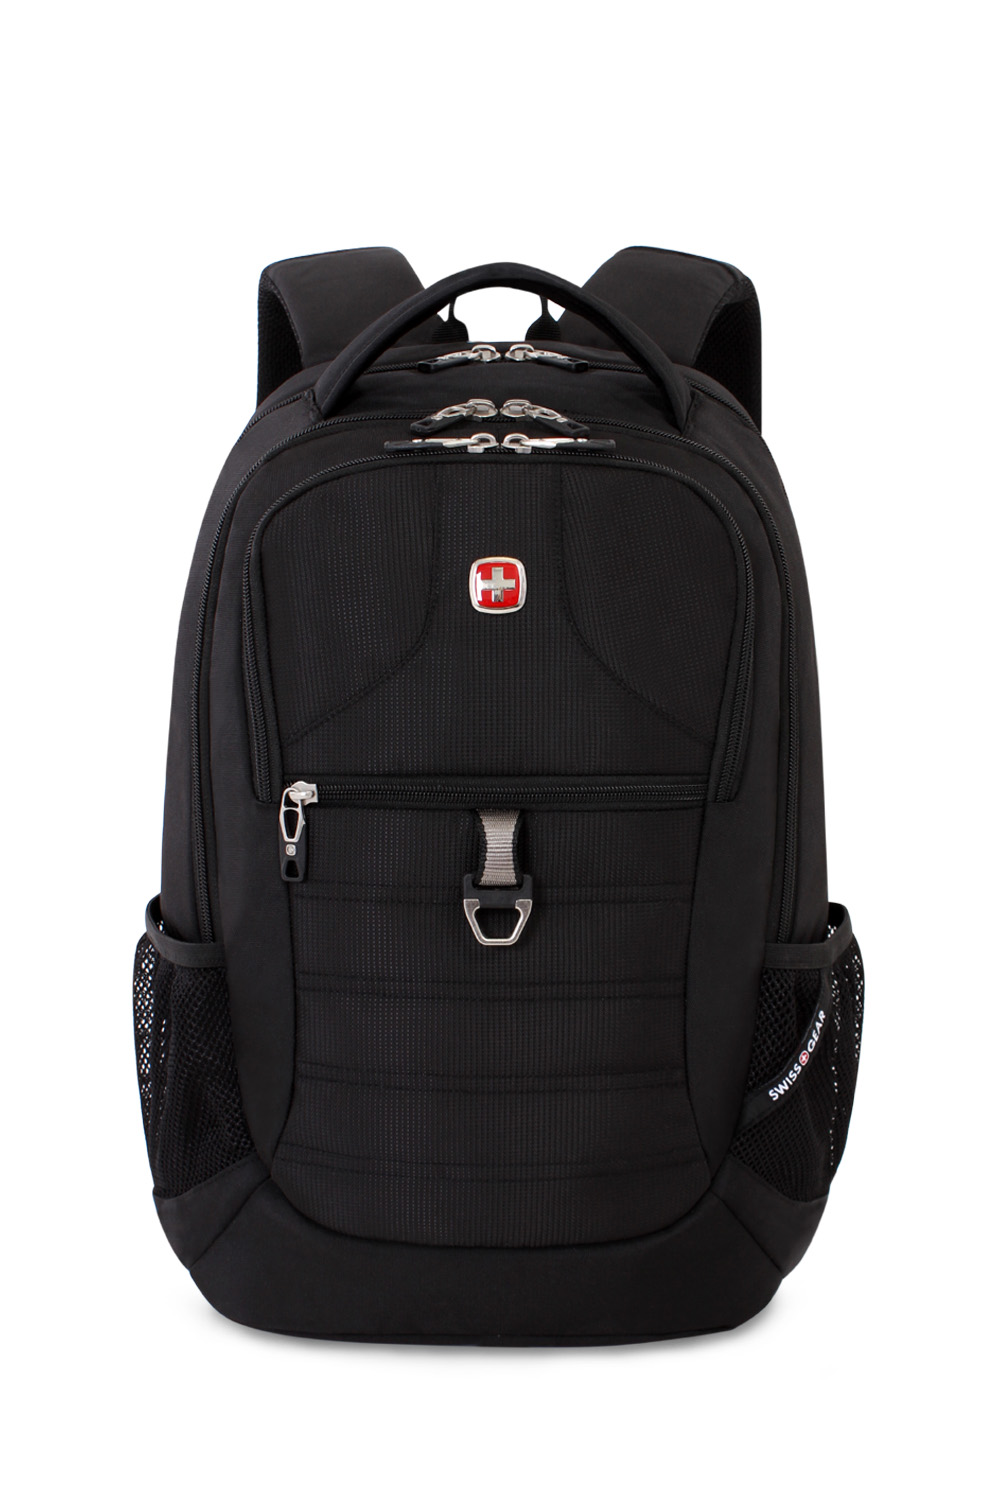 Swissgear Backpack And Laptop Bag With USB Black. | eBay